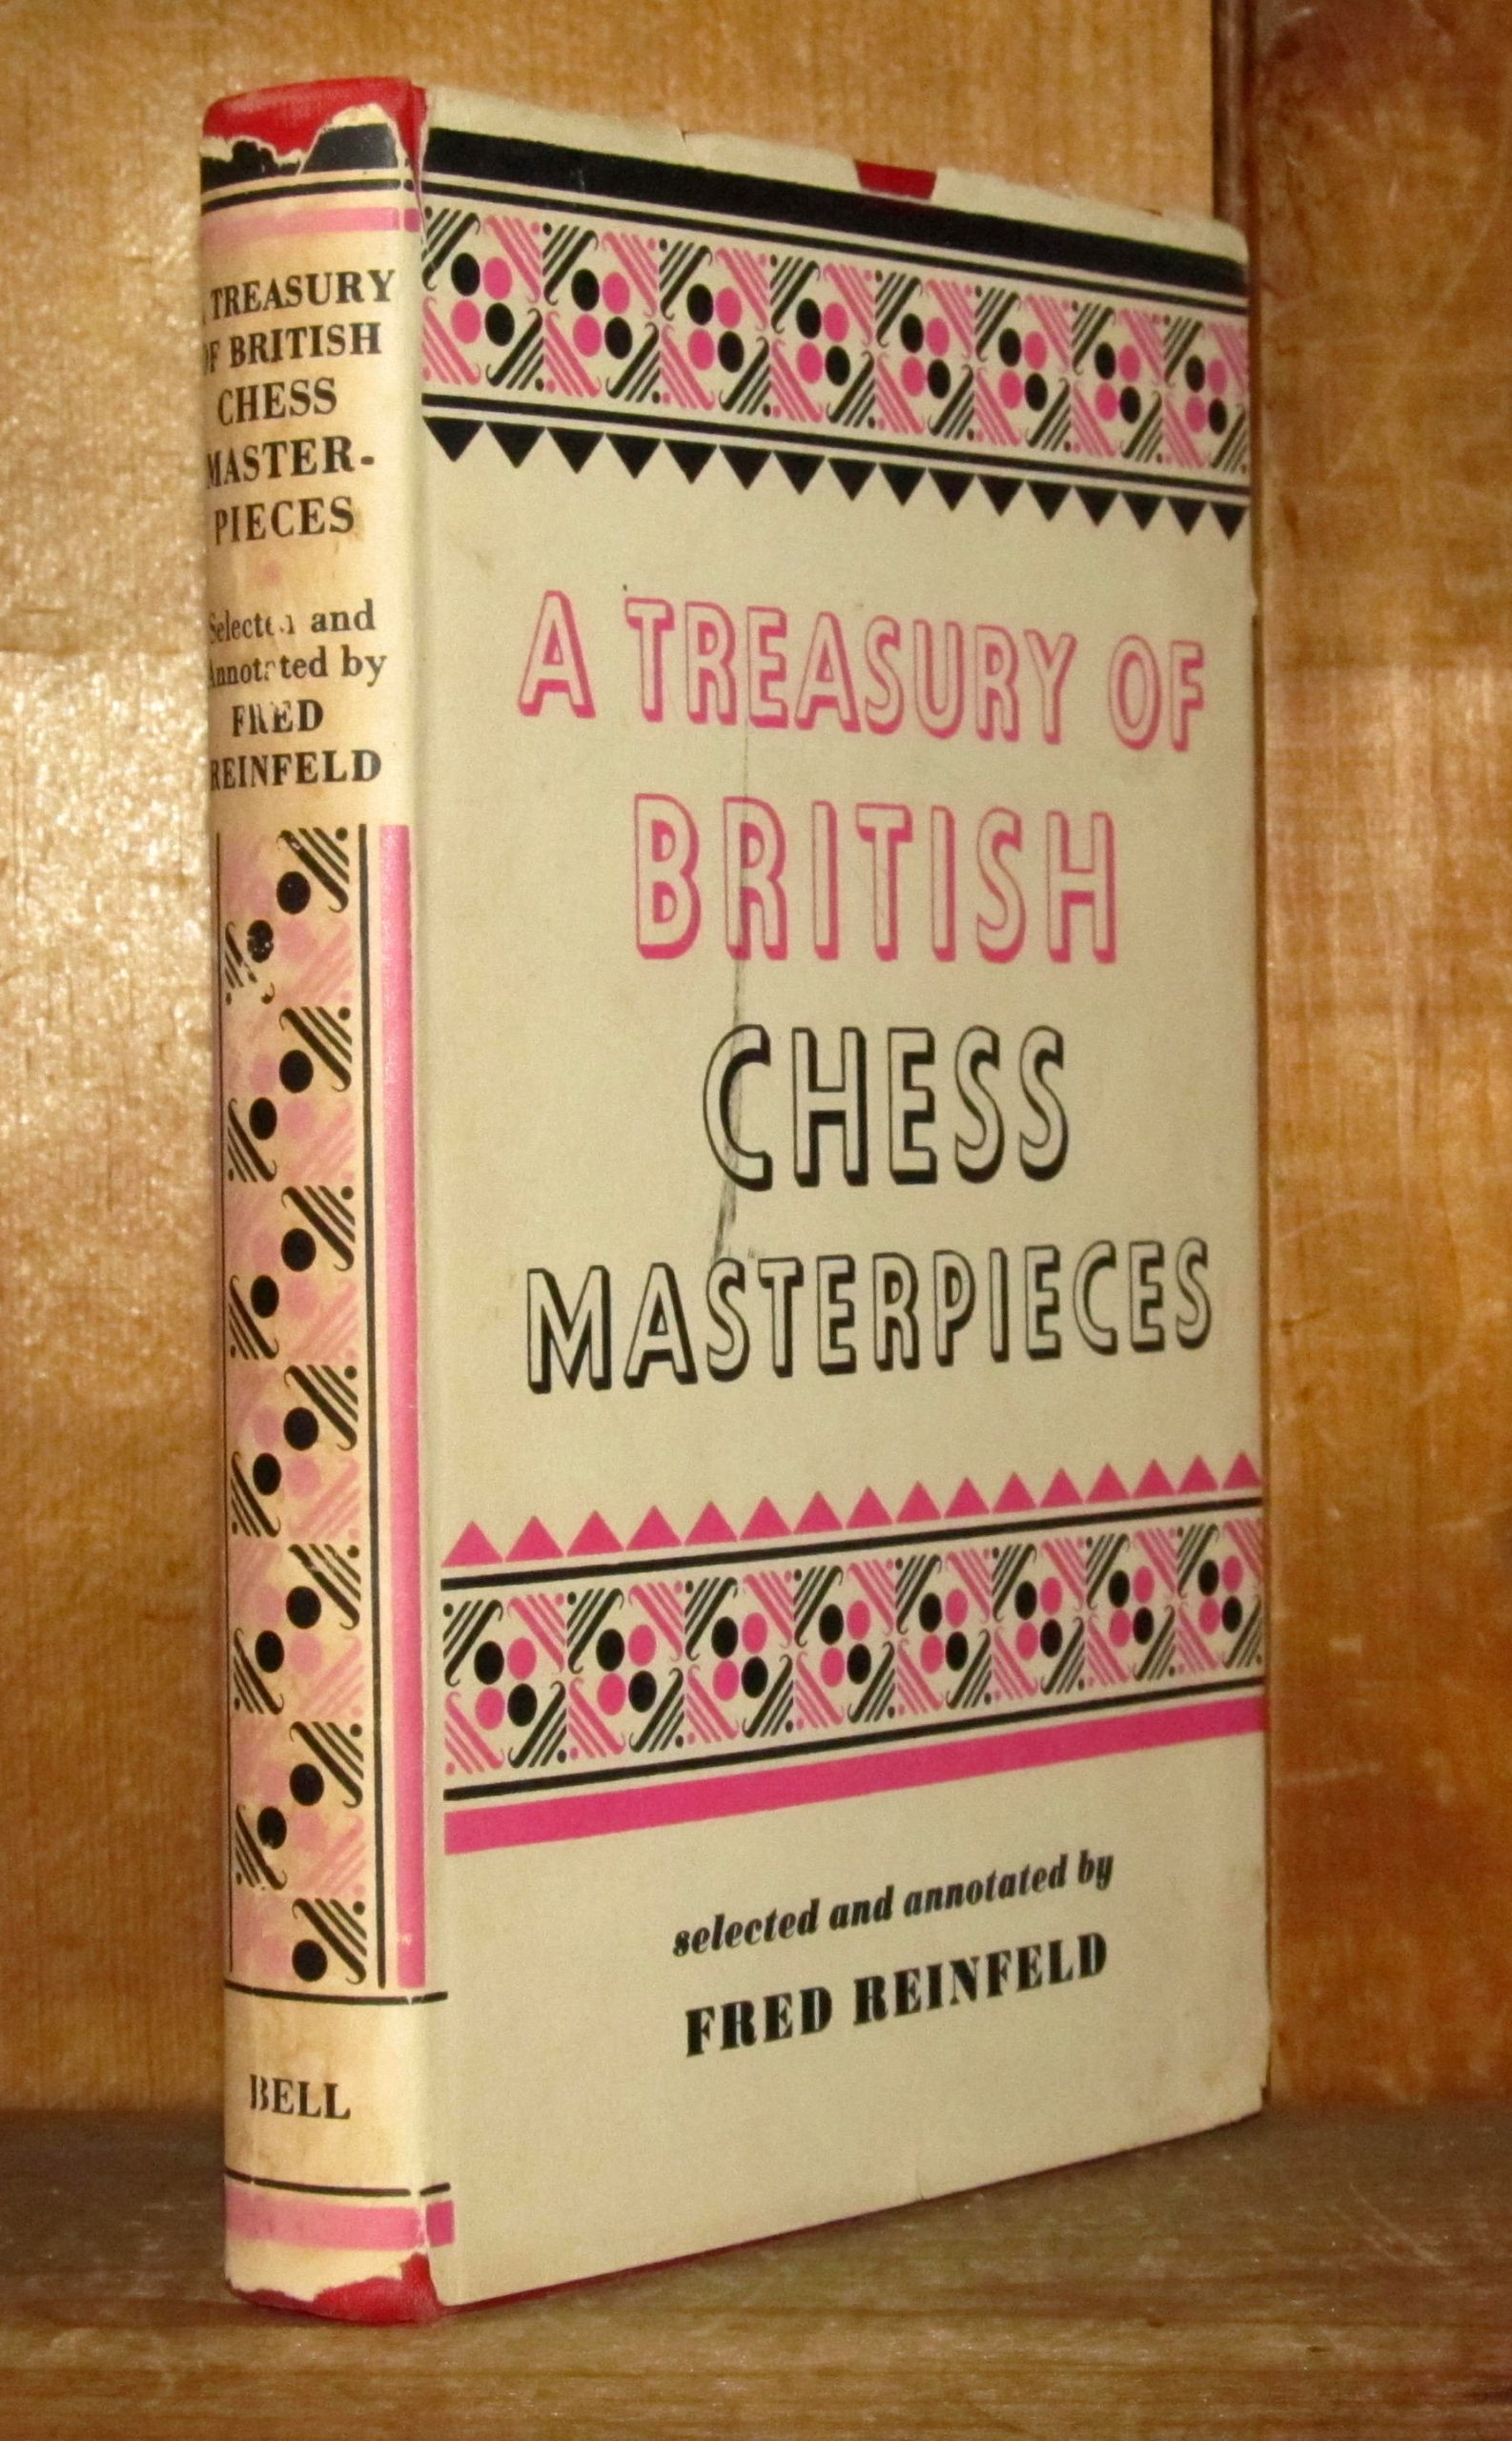 A Treasury of British Chess Masterpieces, Fred Reinfeld, George Bell and Sons Ltd., 1950